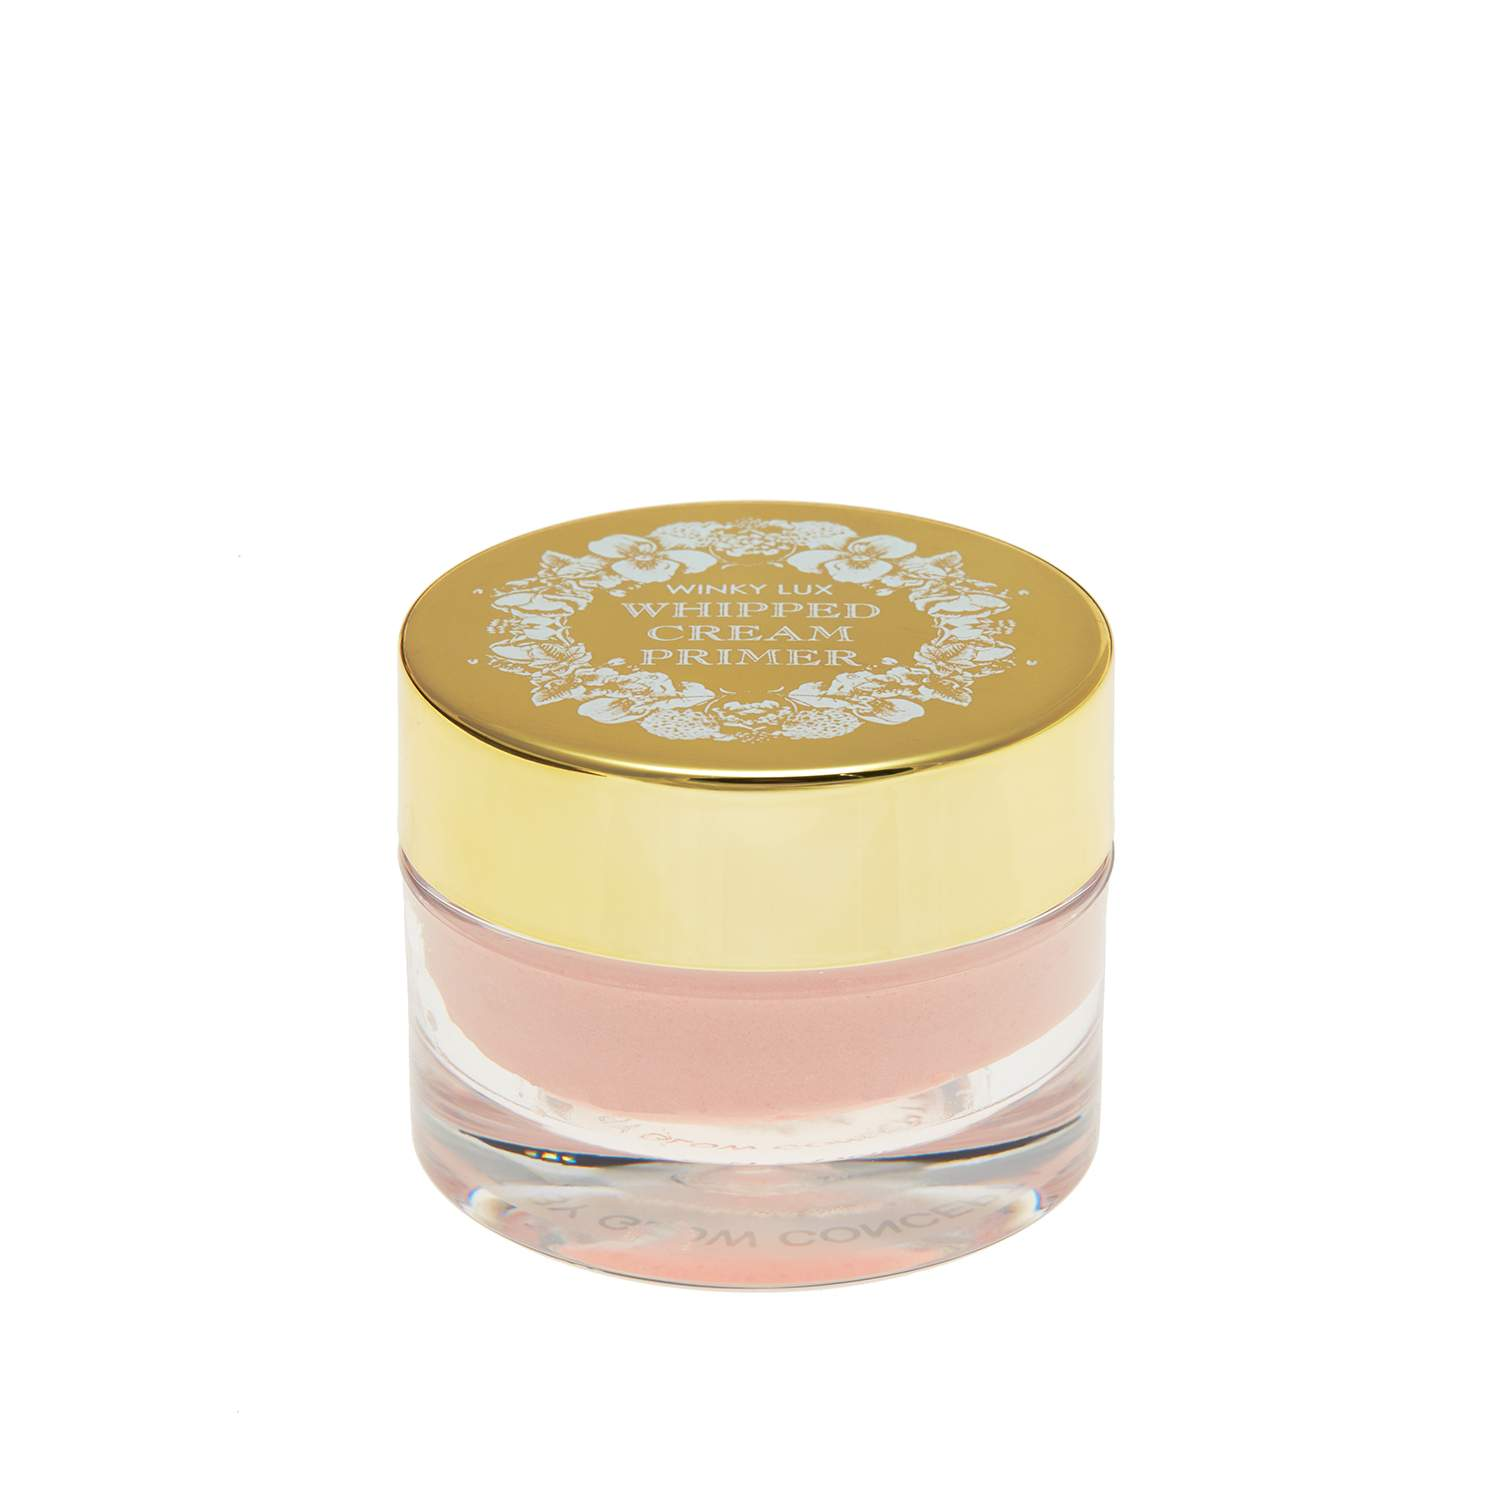 Winky Lux Whipped Cream Primer  1